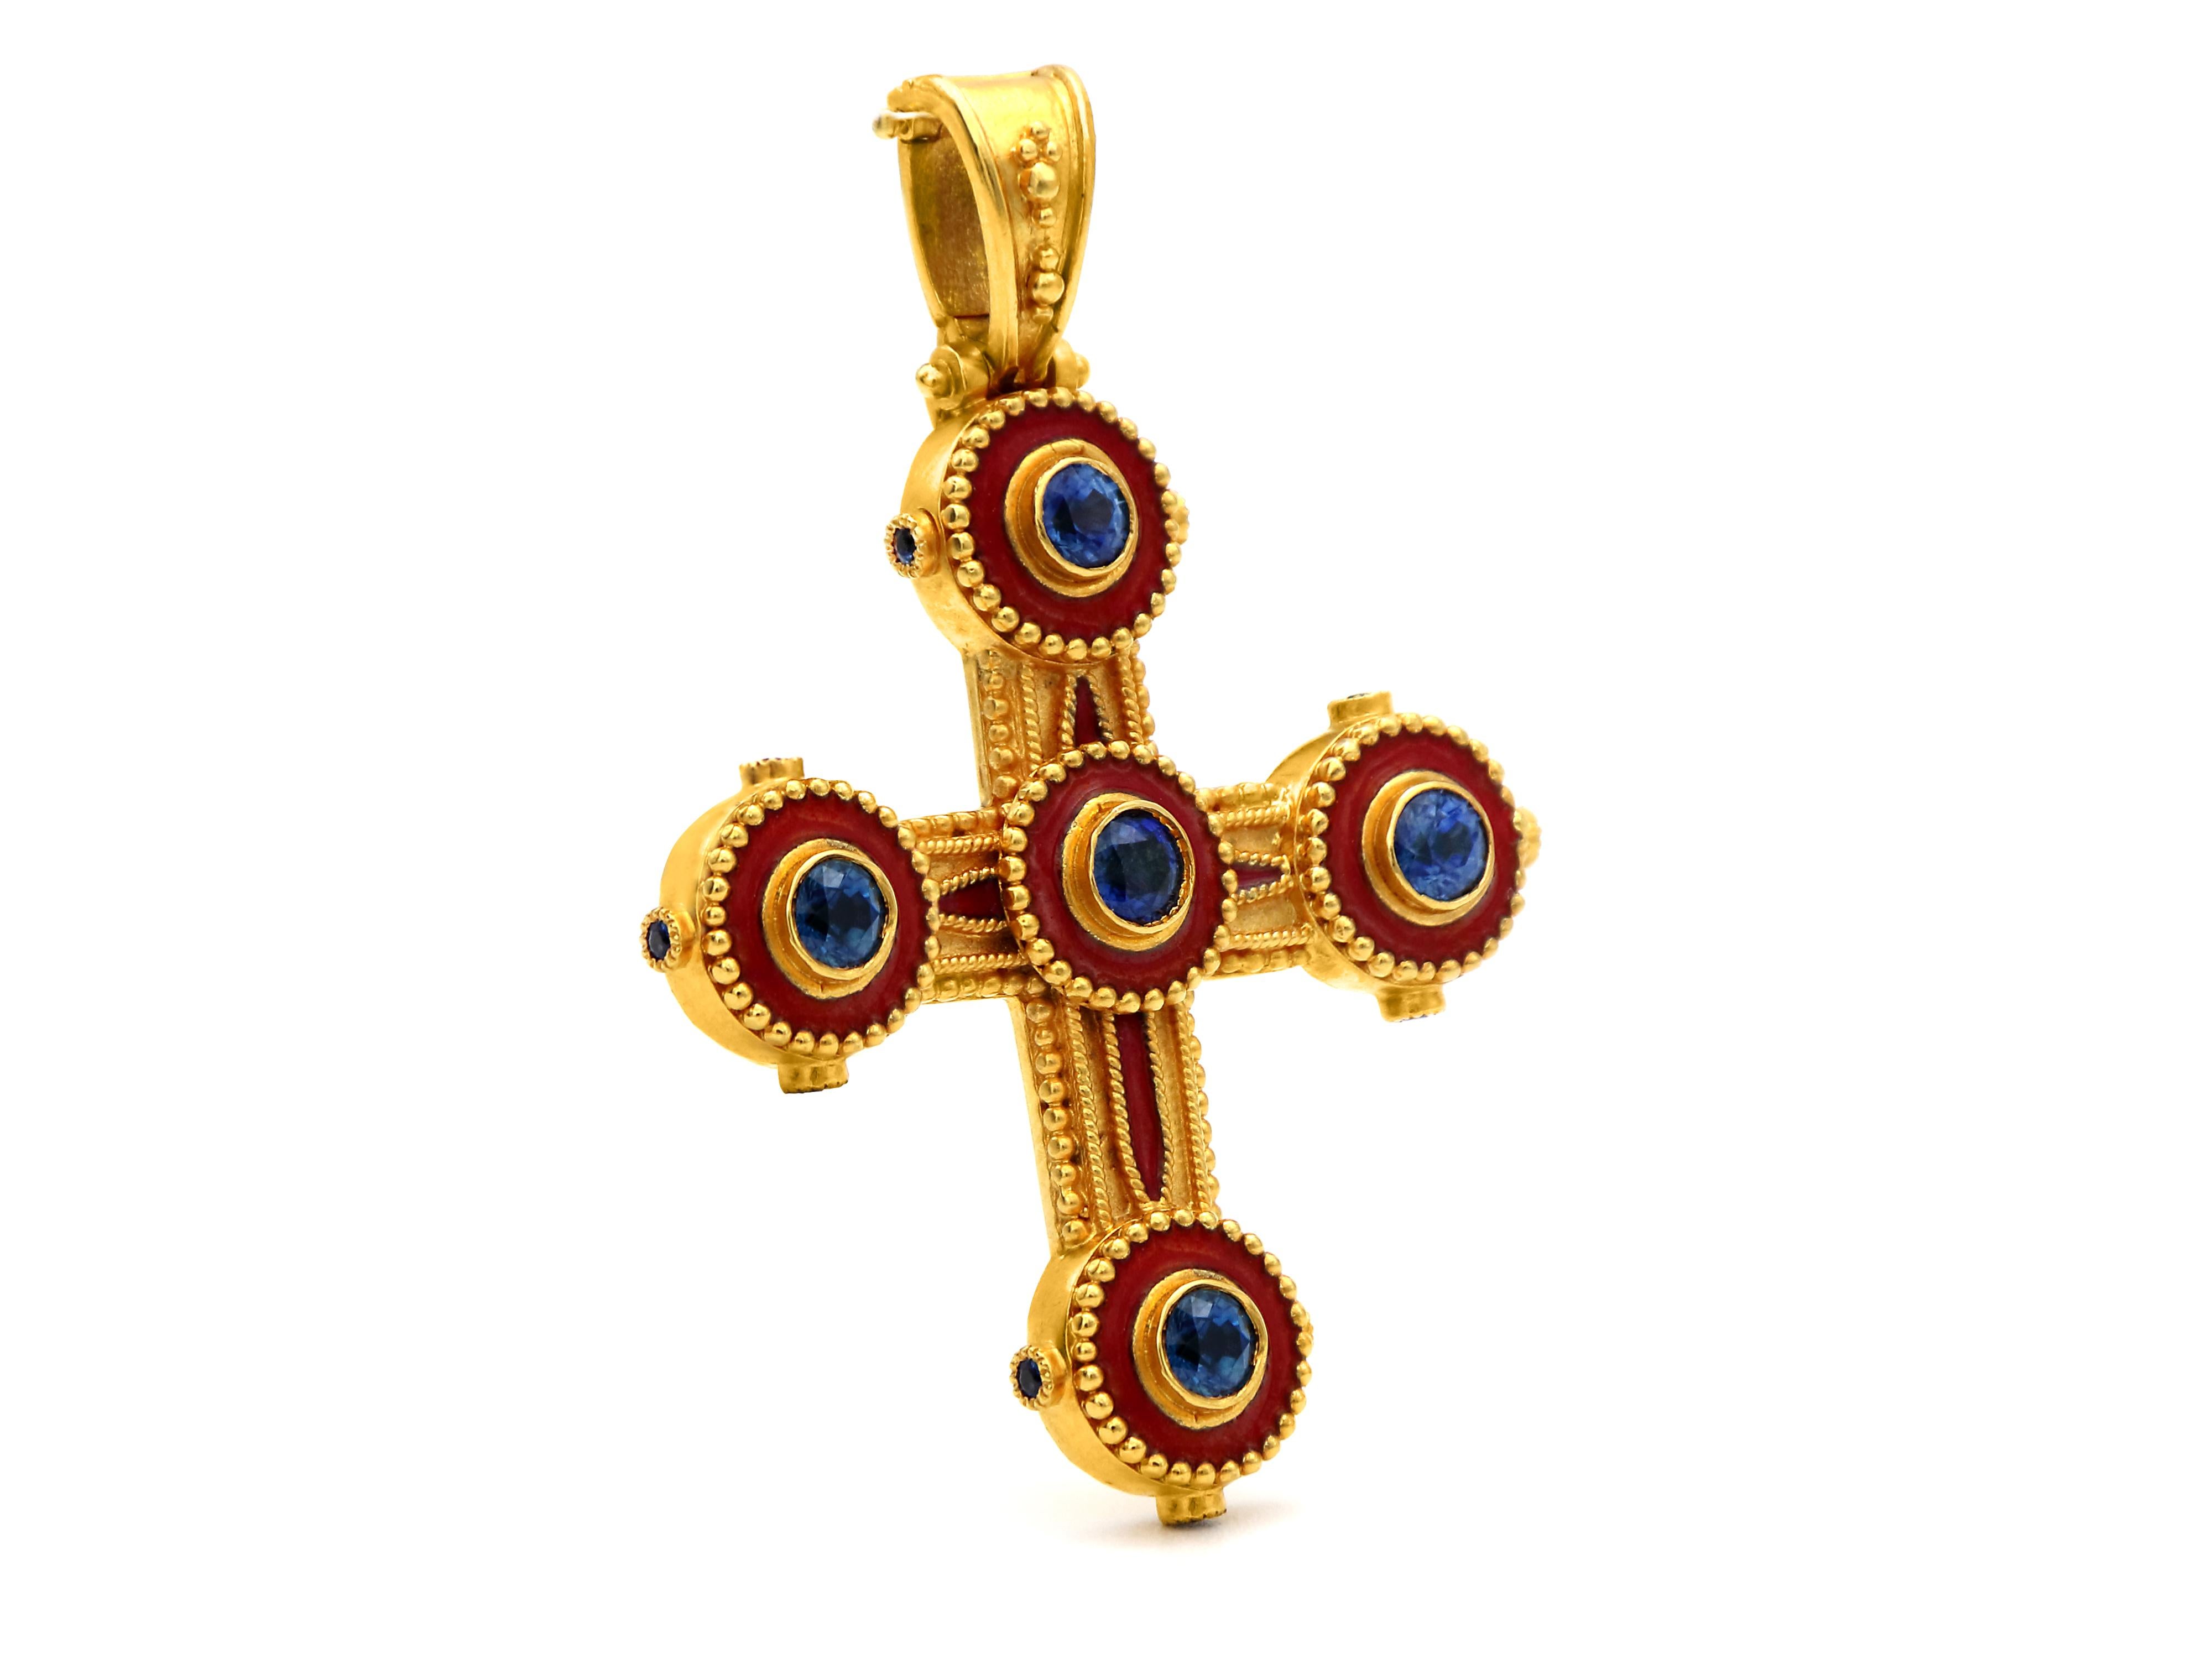 Byzantine era cross in 18 karat gold completely handmade decorated with granulation, round cut sapphires 1,15 carats and red enamel. On the sides of its circle there are three smaller sapphires total 0,36 carats to add authenticity to the museum